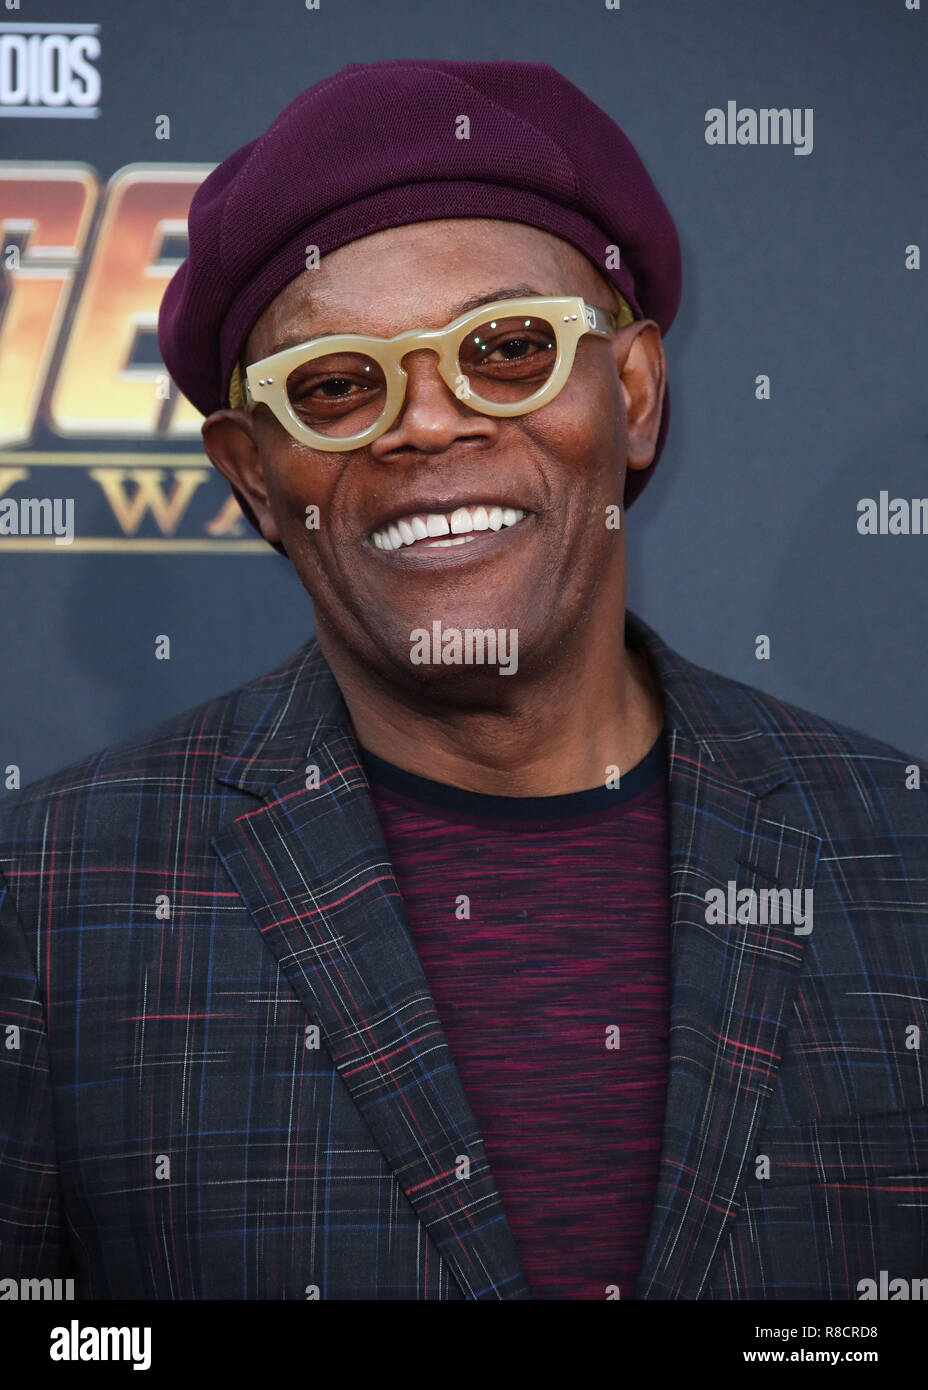 HOLLYWOOD, LOS ANGELES, CA, USA - APRIL 23: Samuel L. Jackson at the World Premiere Of Disney And Marvel's 'Avengers: Infinity War' held at the El Capitan Theatre, Dolby Theatre and TCL Chinese Theatre IMAX on April 23, 2018 in Hollywood, Los Angeles, California, United States. (Photo by Xavier Collin/Image Press Agency) Stock Photo